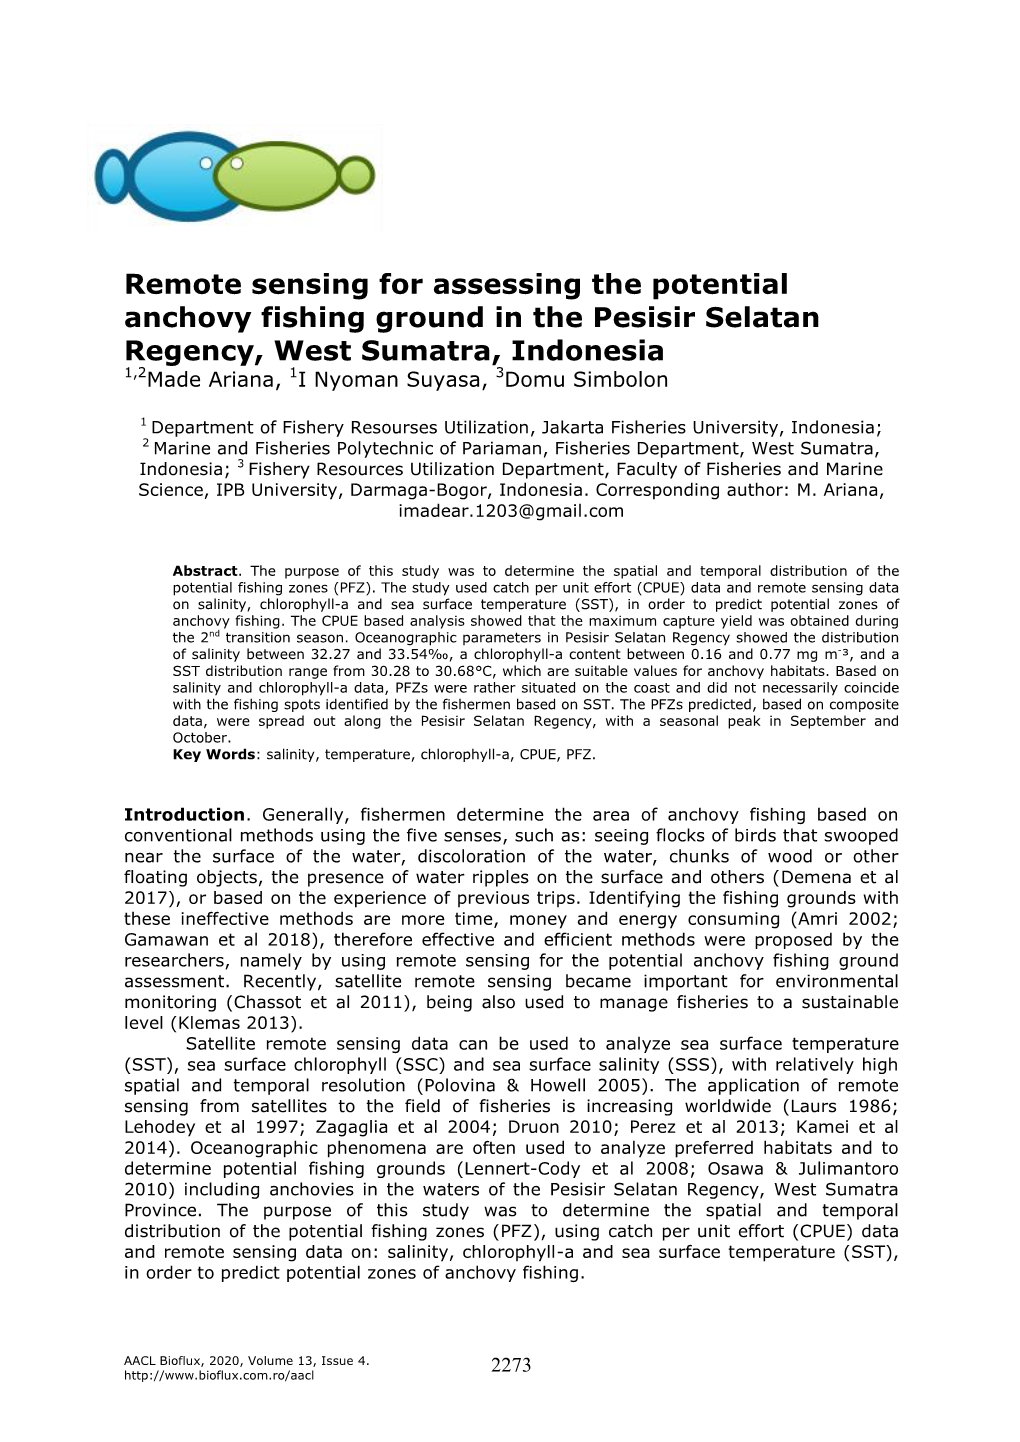 Remote Sensing for Assessing the Potential Anchovy Fishing Ground in the Pesisir Selatan Regency, West Sumatra, Indonesia